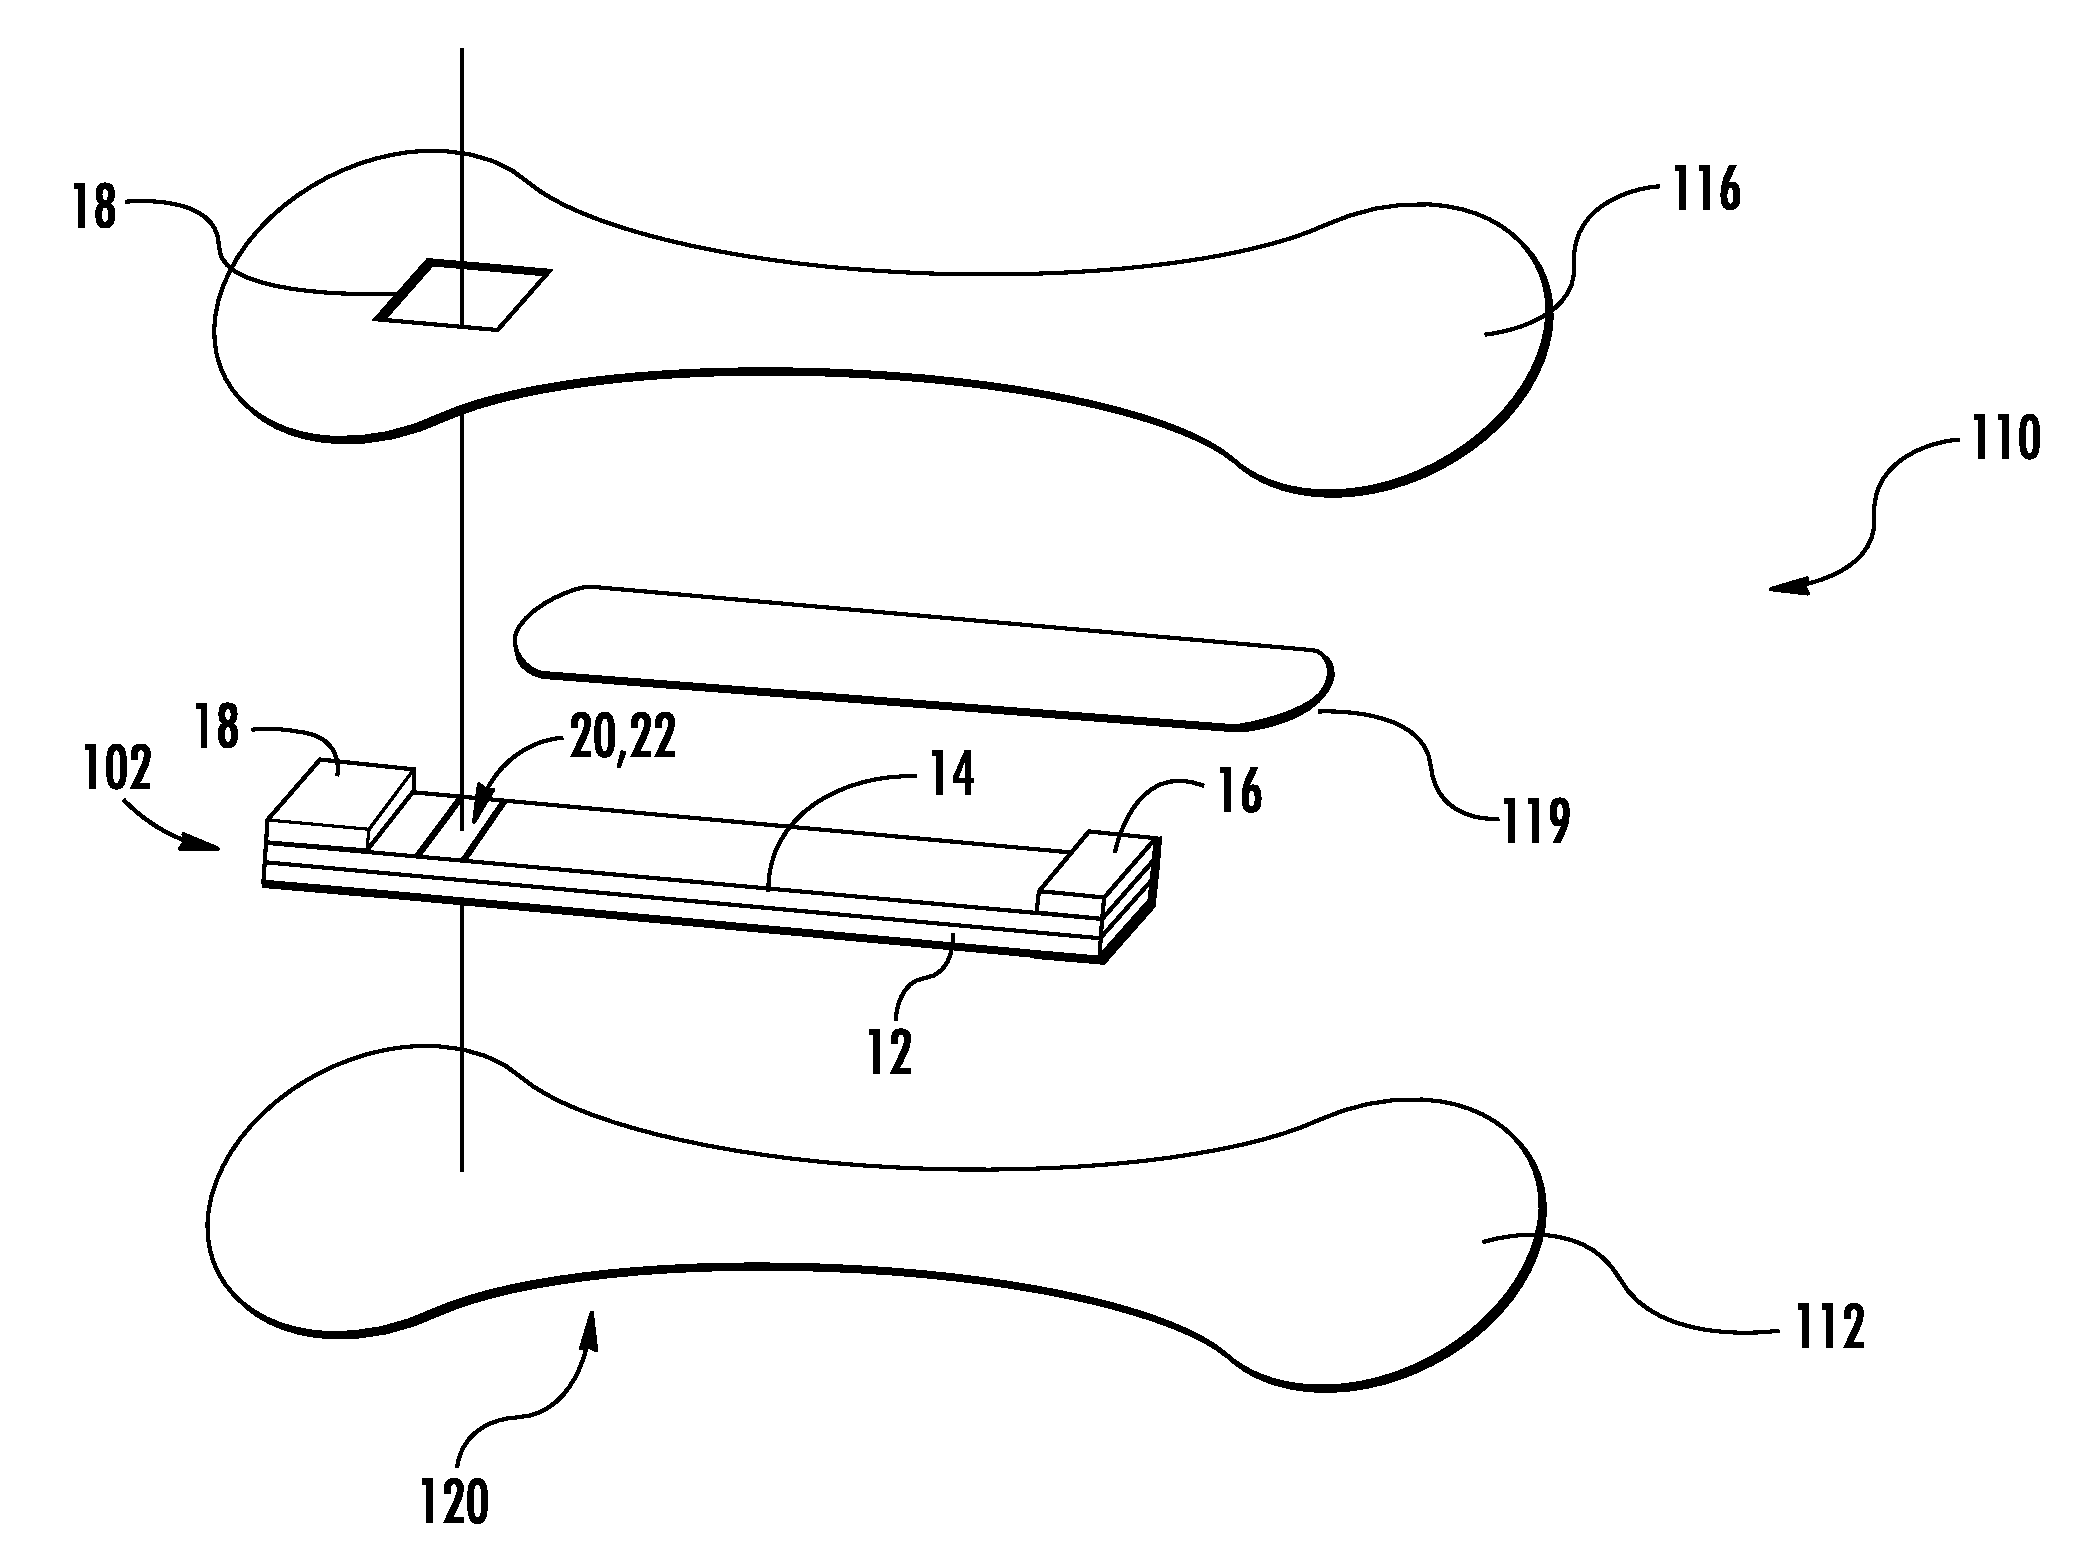 Lateral Flow Device for Attachment to an Absorbent Article